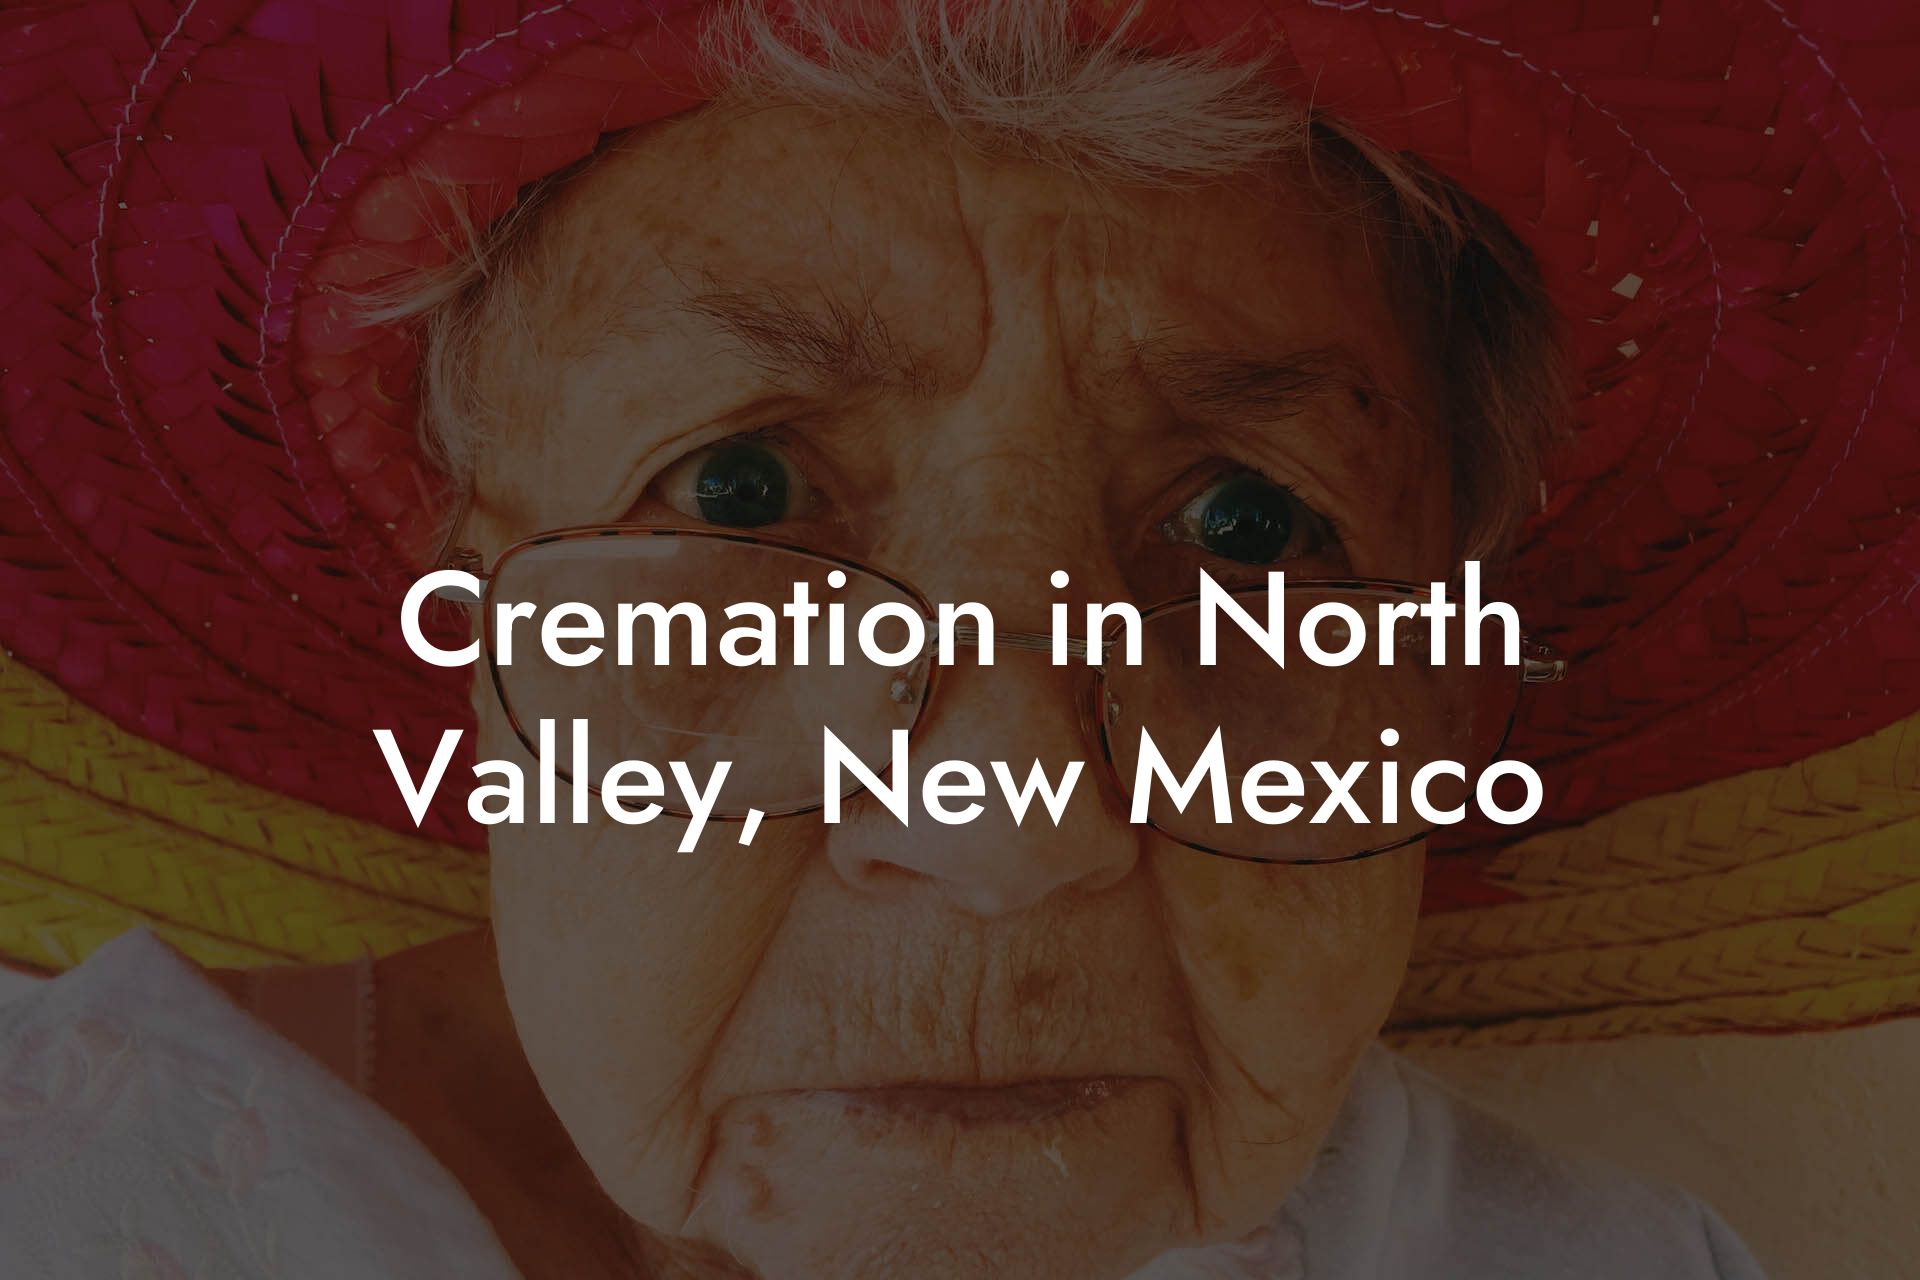 Cremation in North Valley, New Mexico